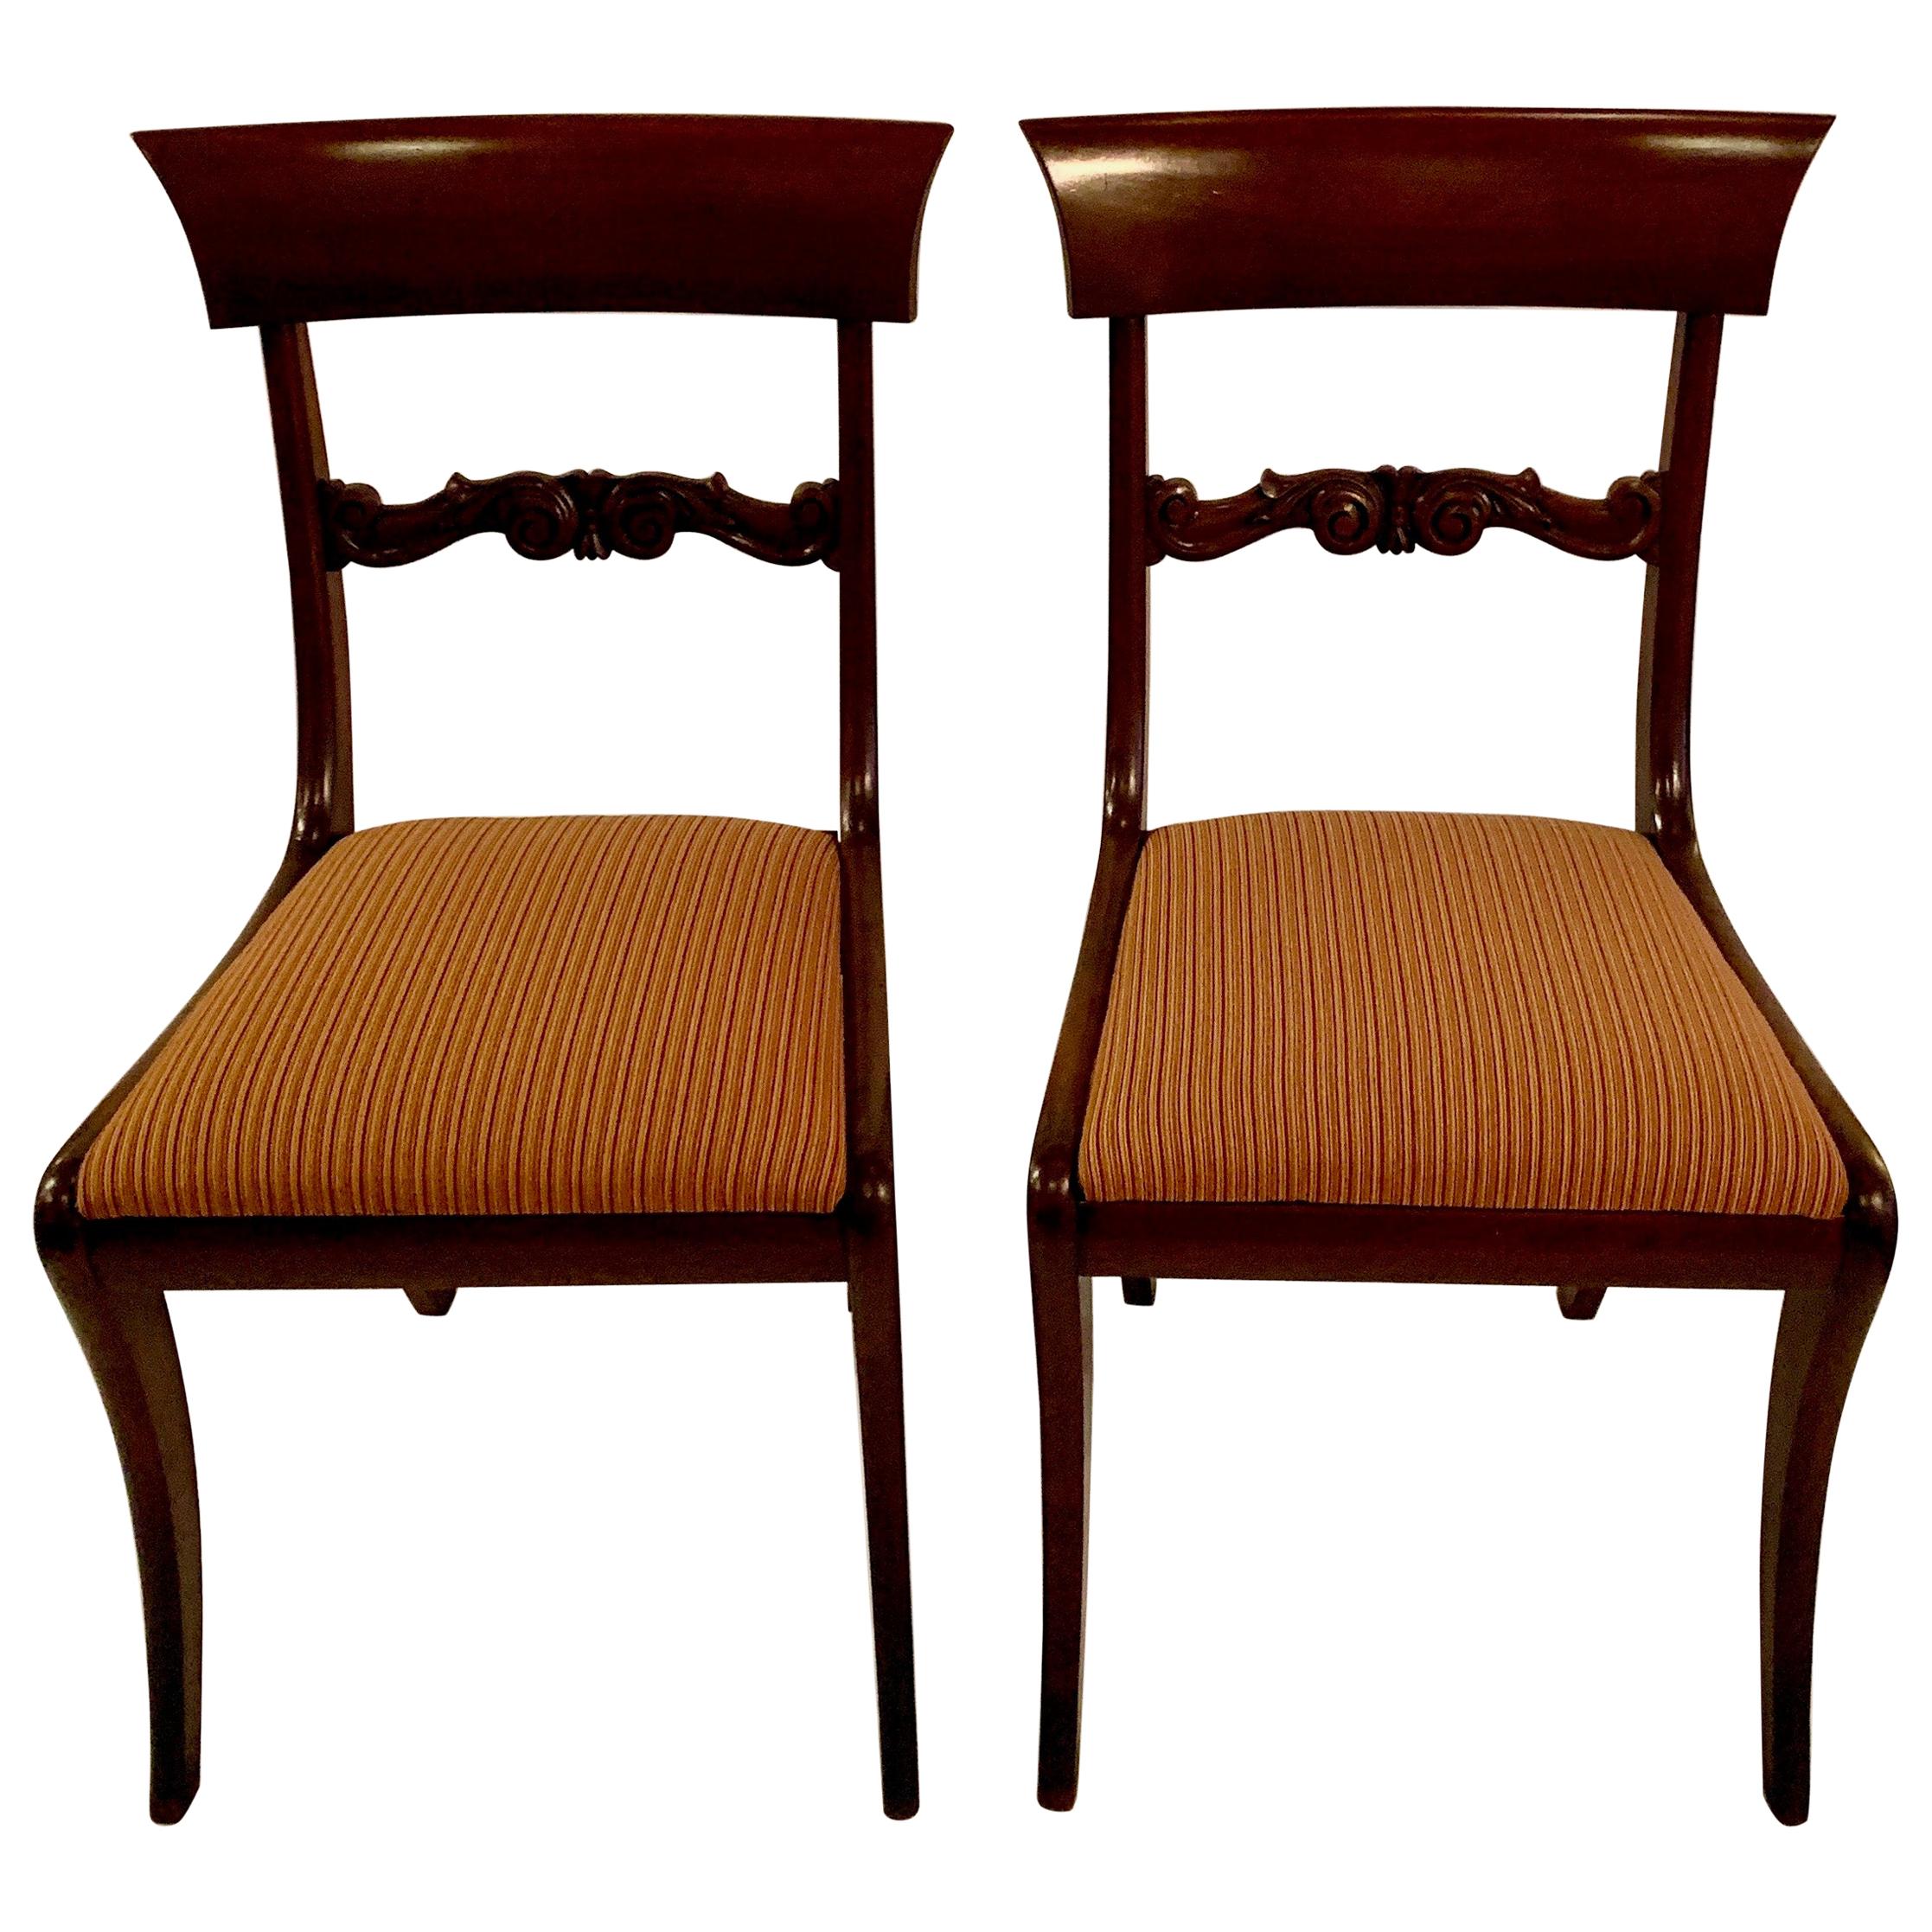 Pair of Antique Federal Style Chairs, circa 1890-1910